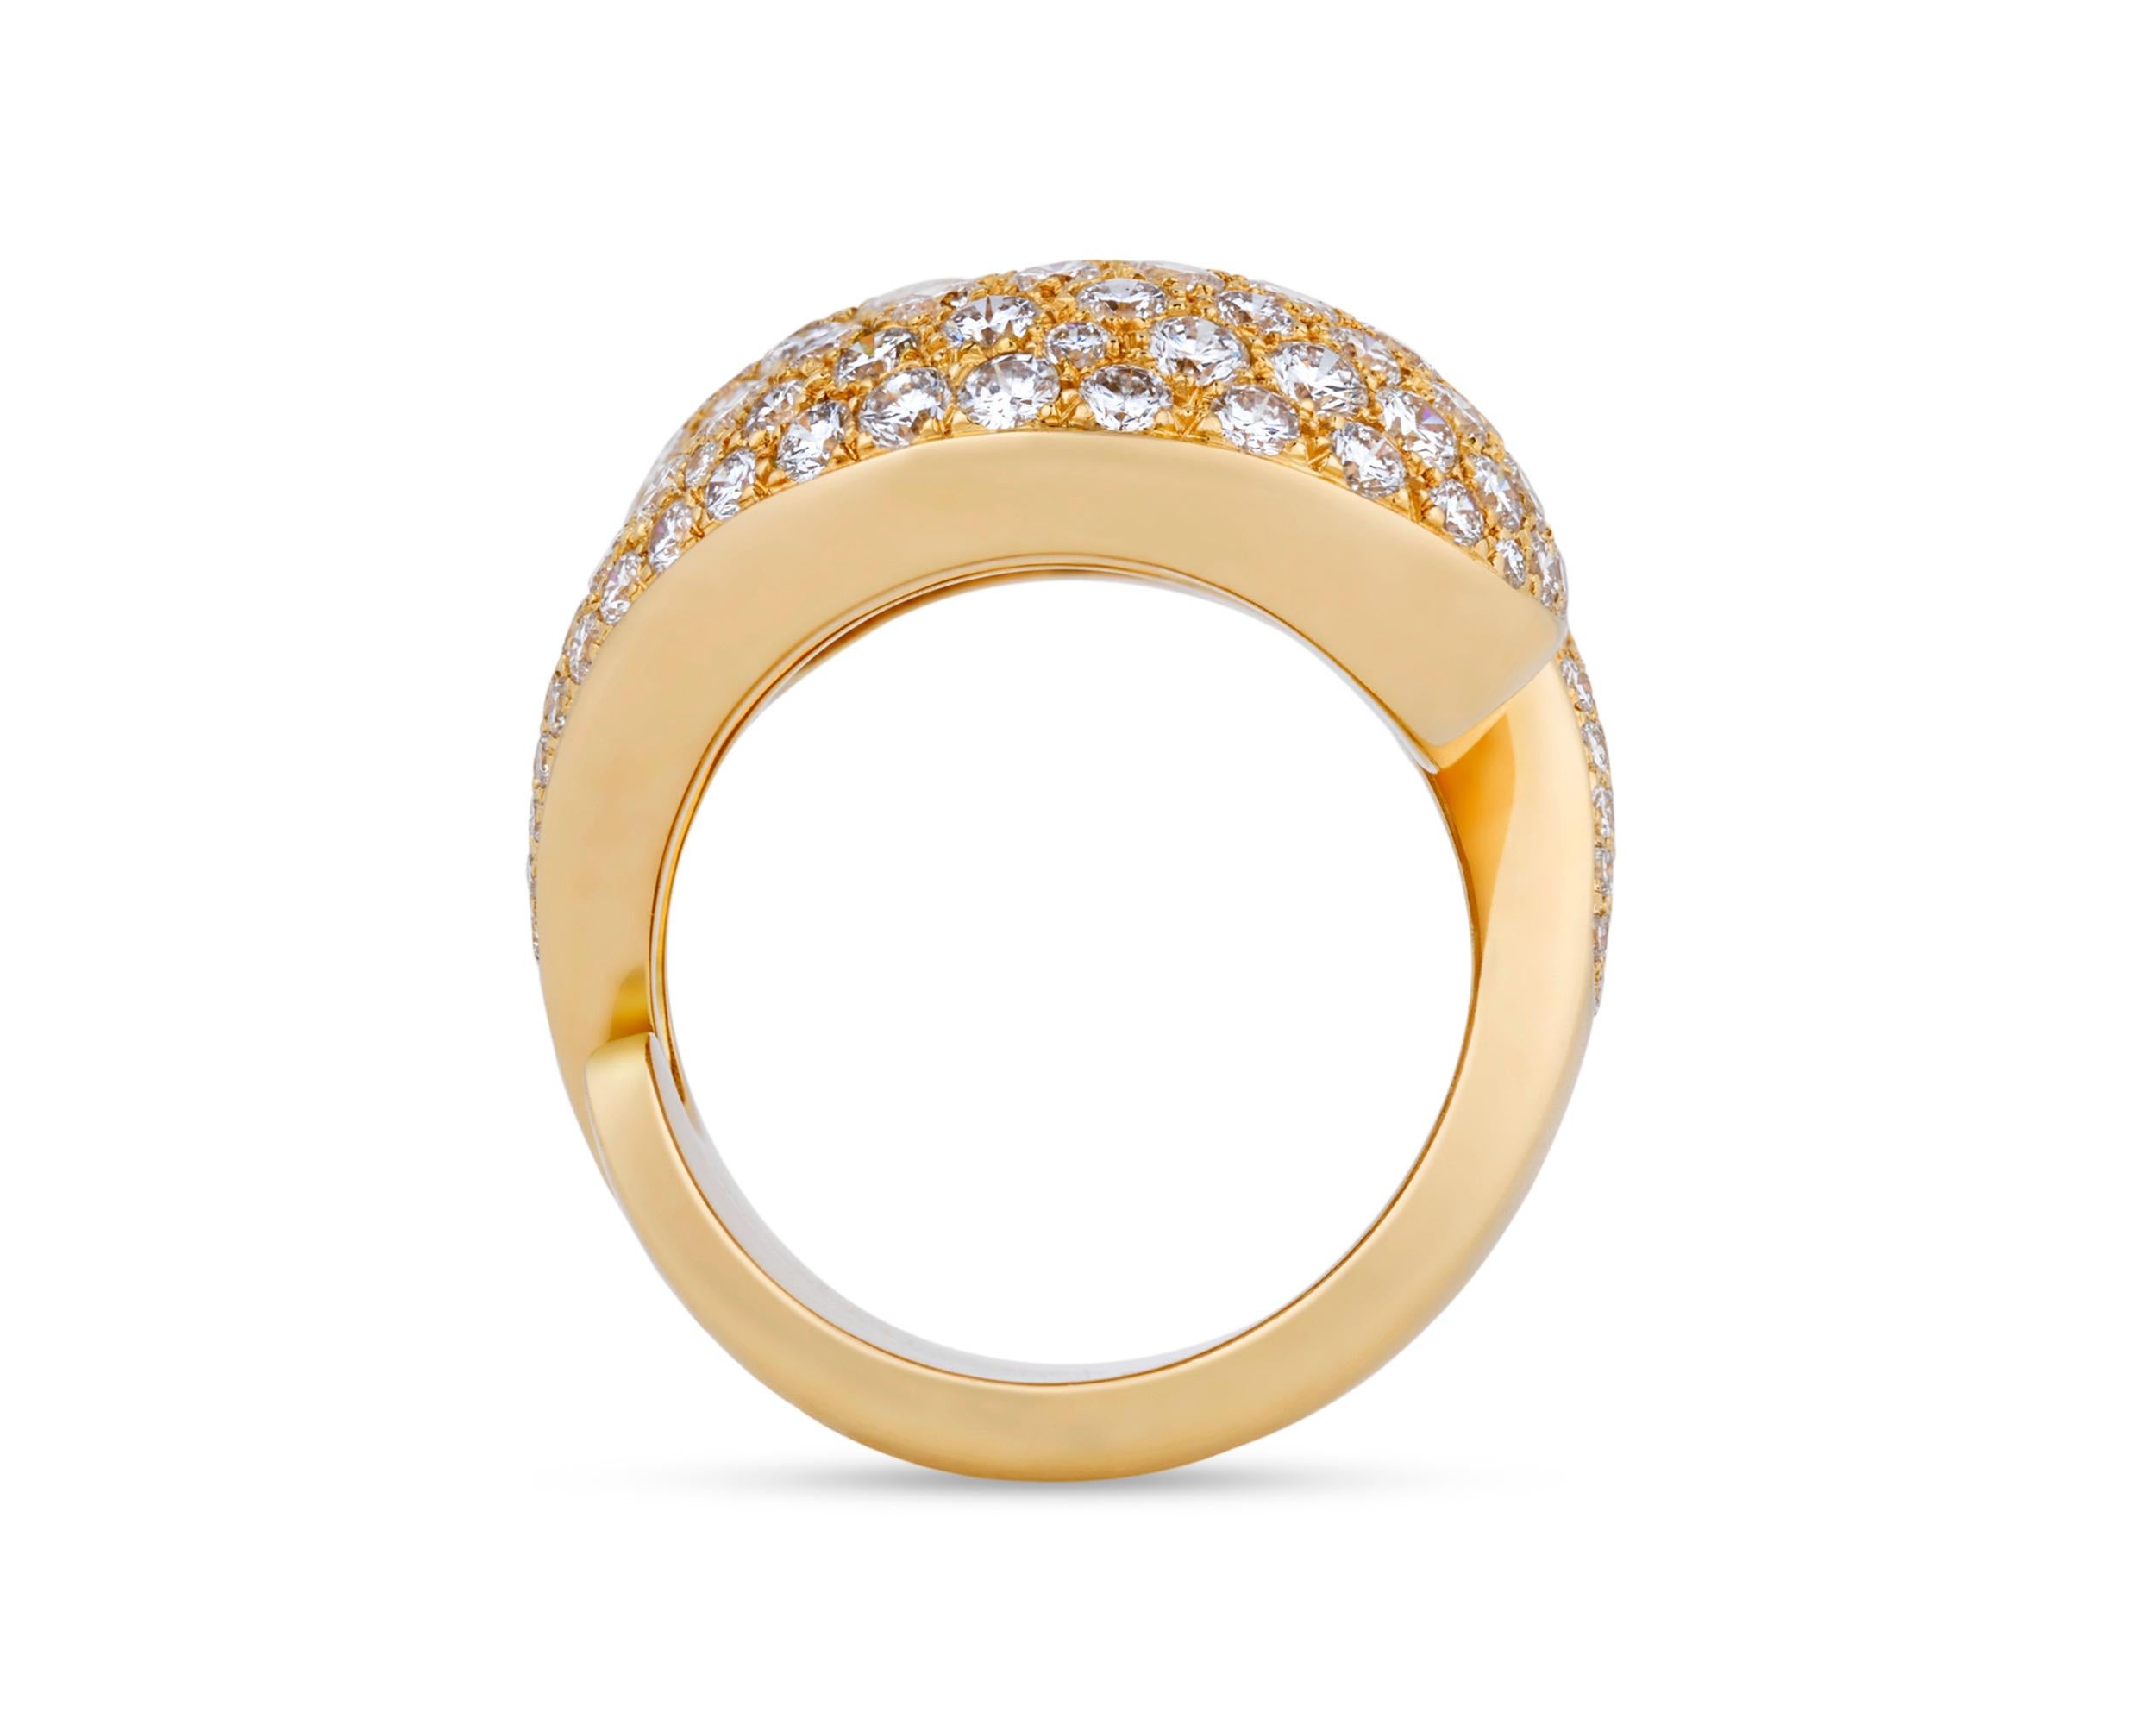 An incredible contemporary design by the legendary Cartier sets apart this exceptional bypass ring. Crafted of 18k yellow gold, the piece is designed as two curved, bombe sections in symmetrical opposition, both pavé set with approximately 5.00